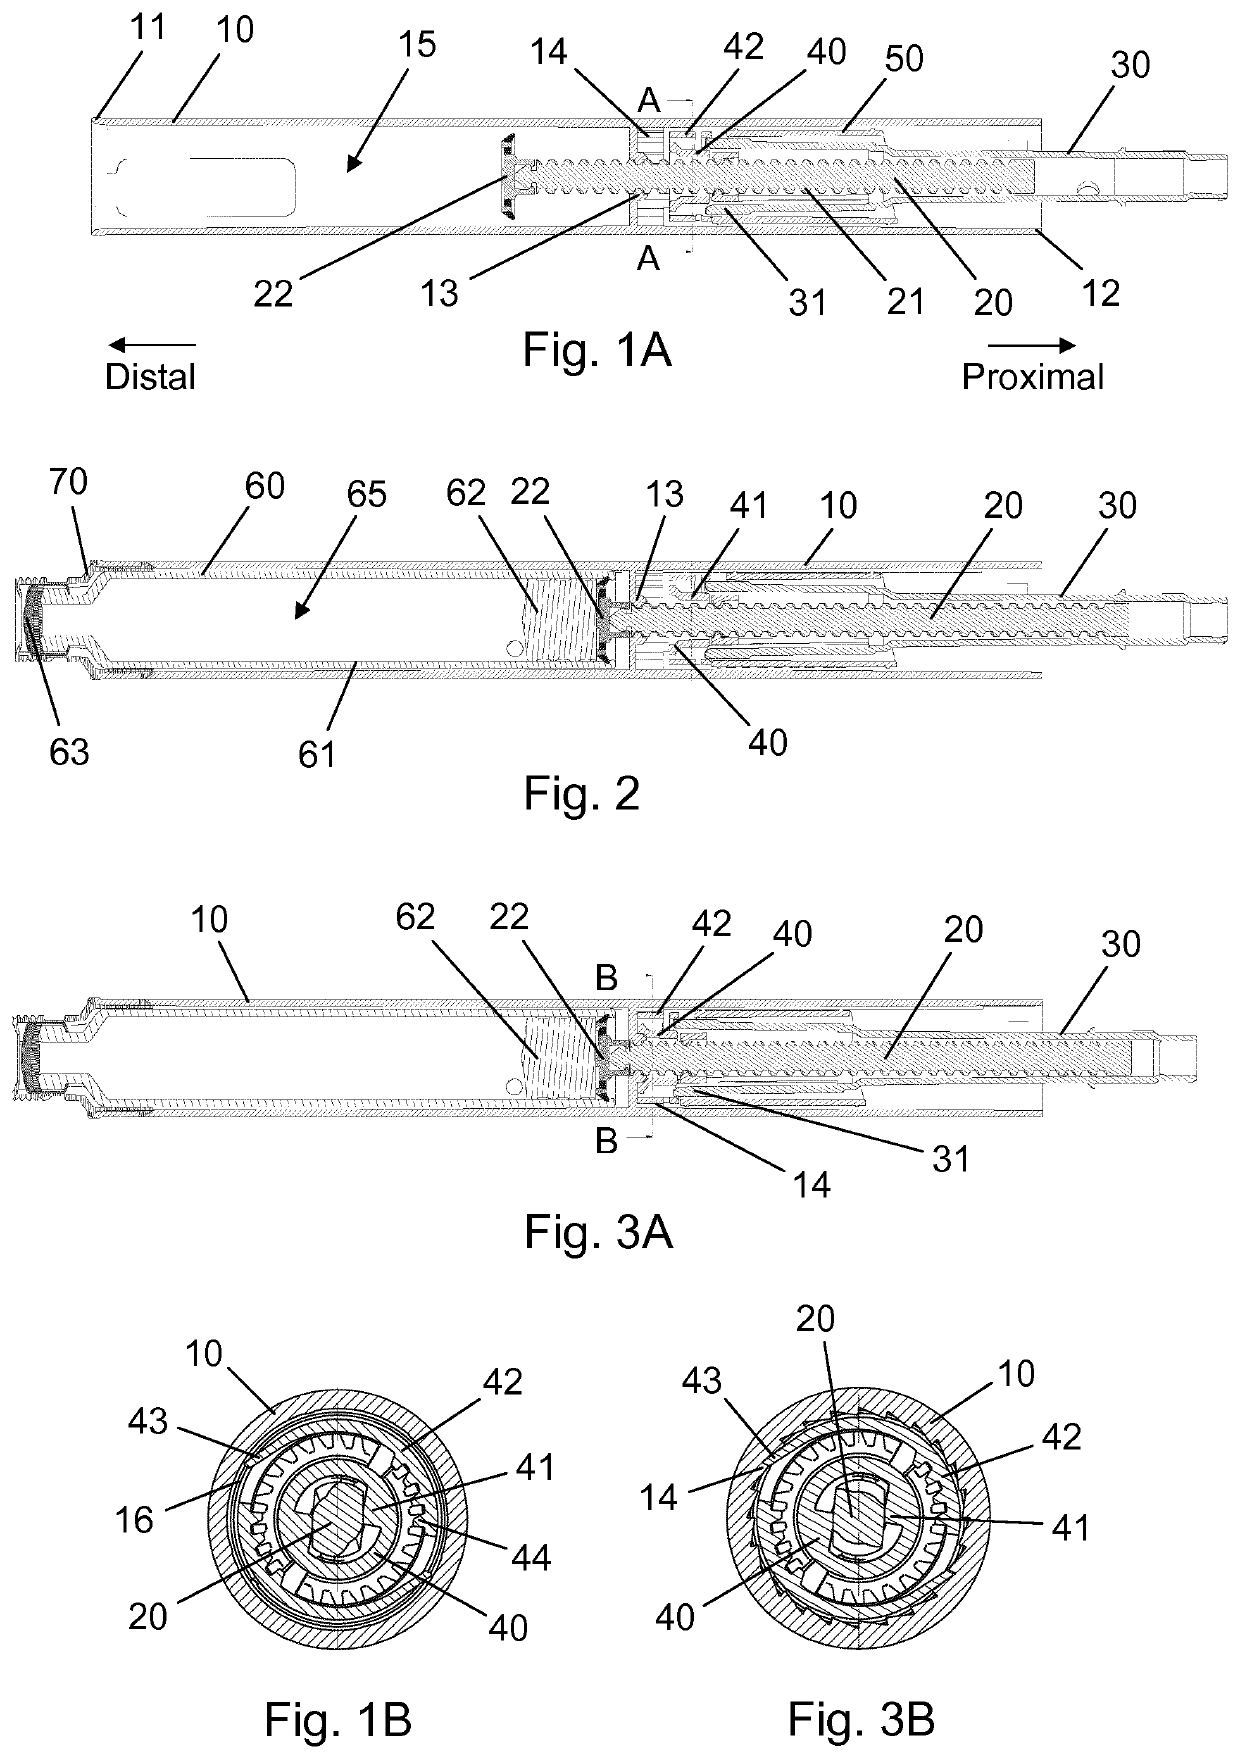 Method of manufacturing prefilled drug delivery devices